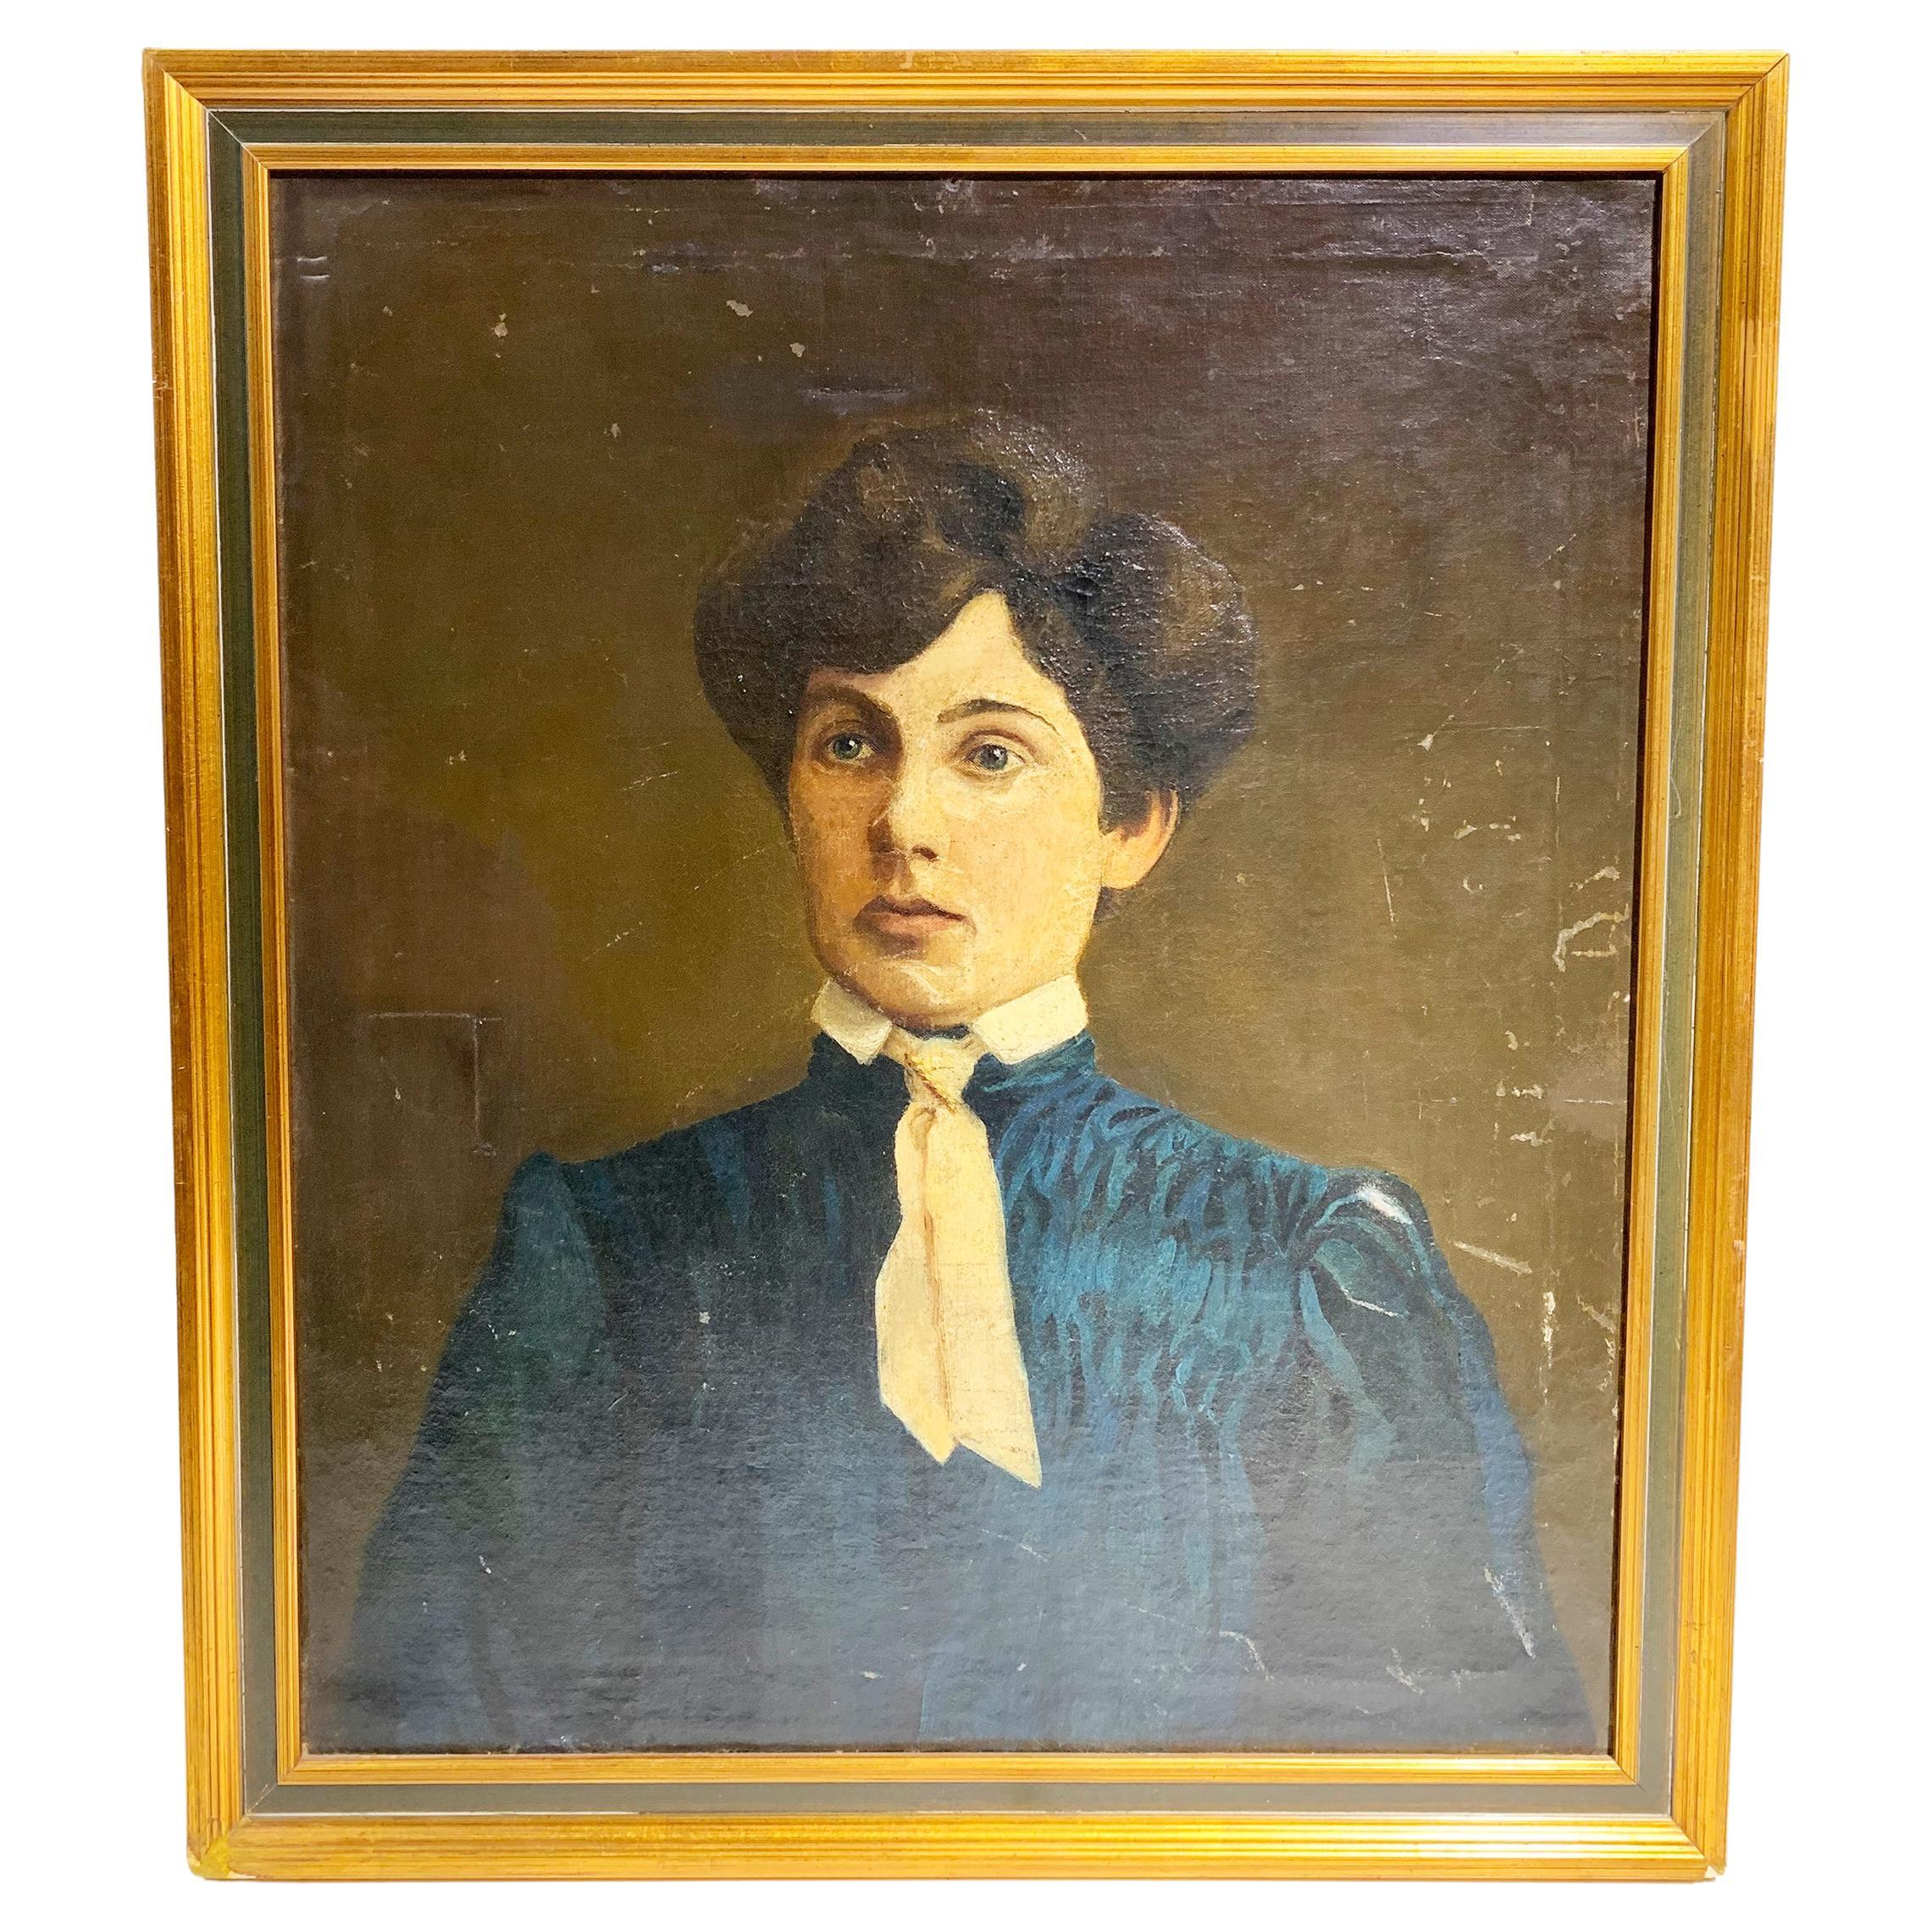 19th Century Portrait Wooden Framed Painting / Oil on Canvas